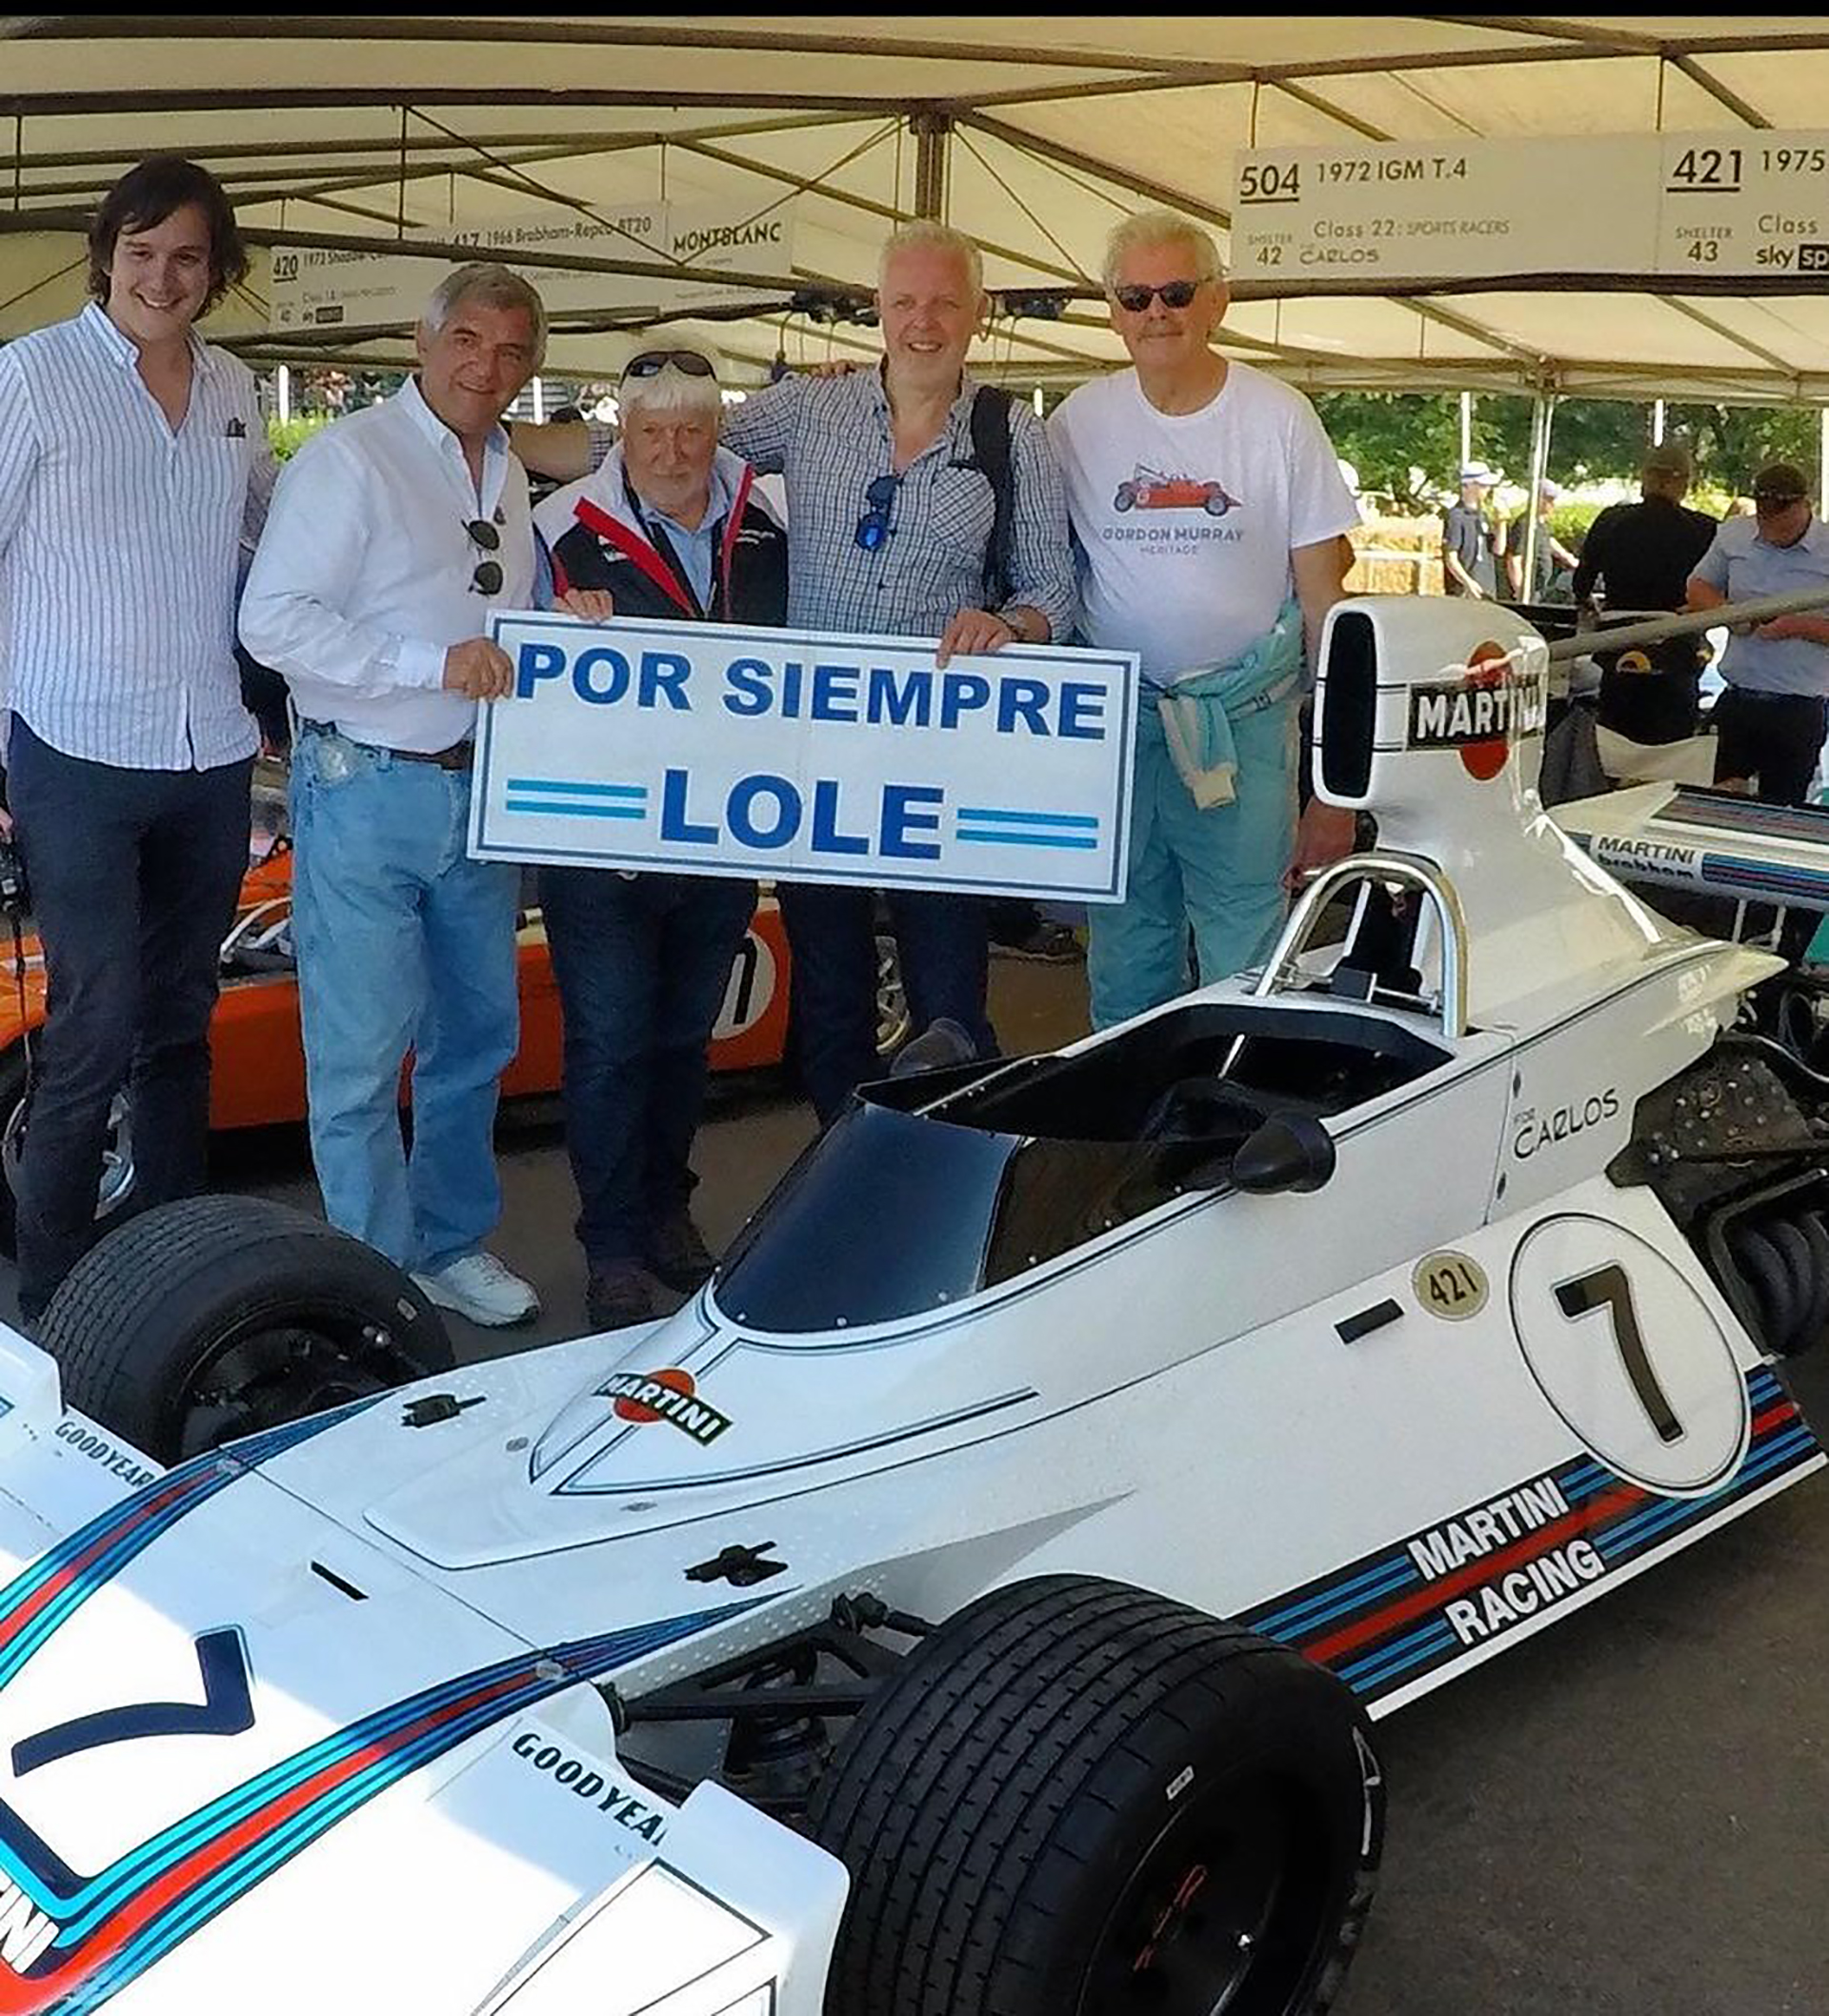 The Brabham BT44 of Lole Reutemann from 1975. The second from the left is the Argentine engineer Sergio Rinland, who worked in F1 and the one on the far right is the creator of the car, the designer Gordon Murray (@AlertaF1)